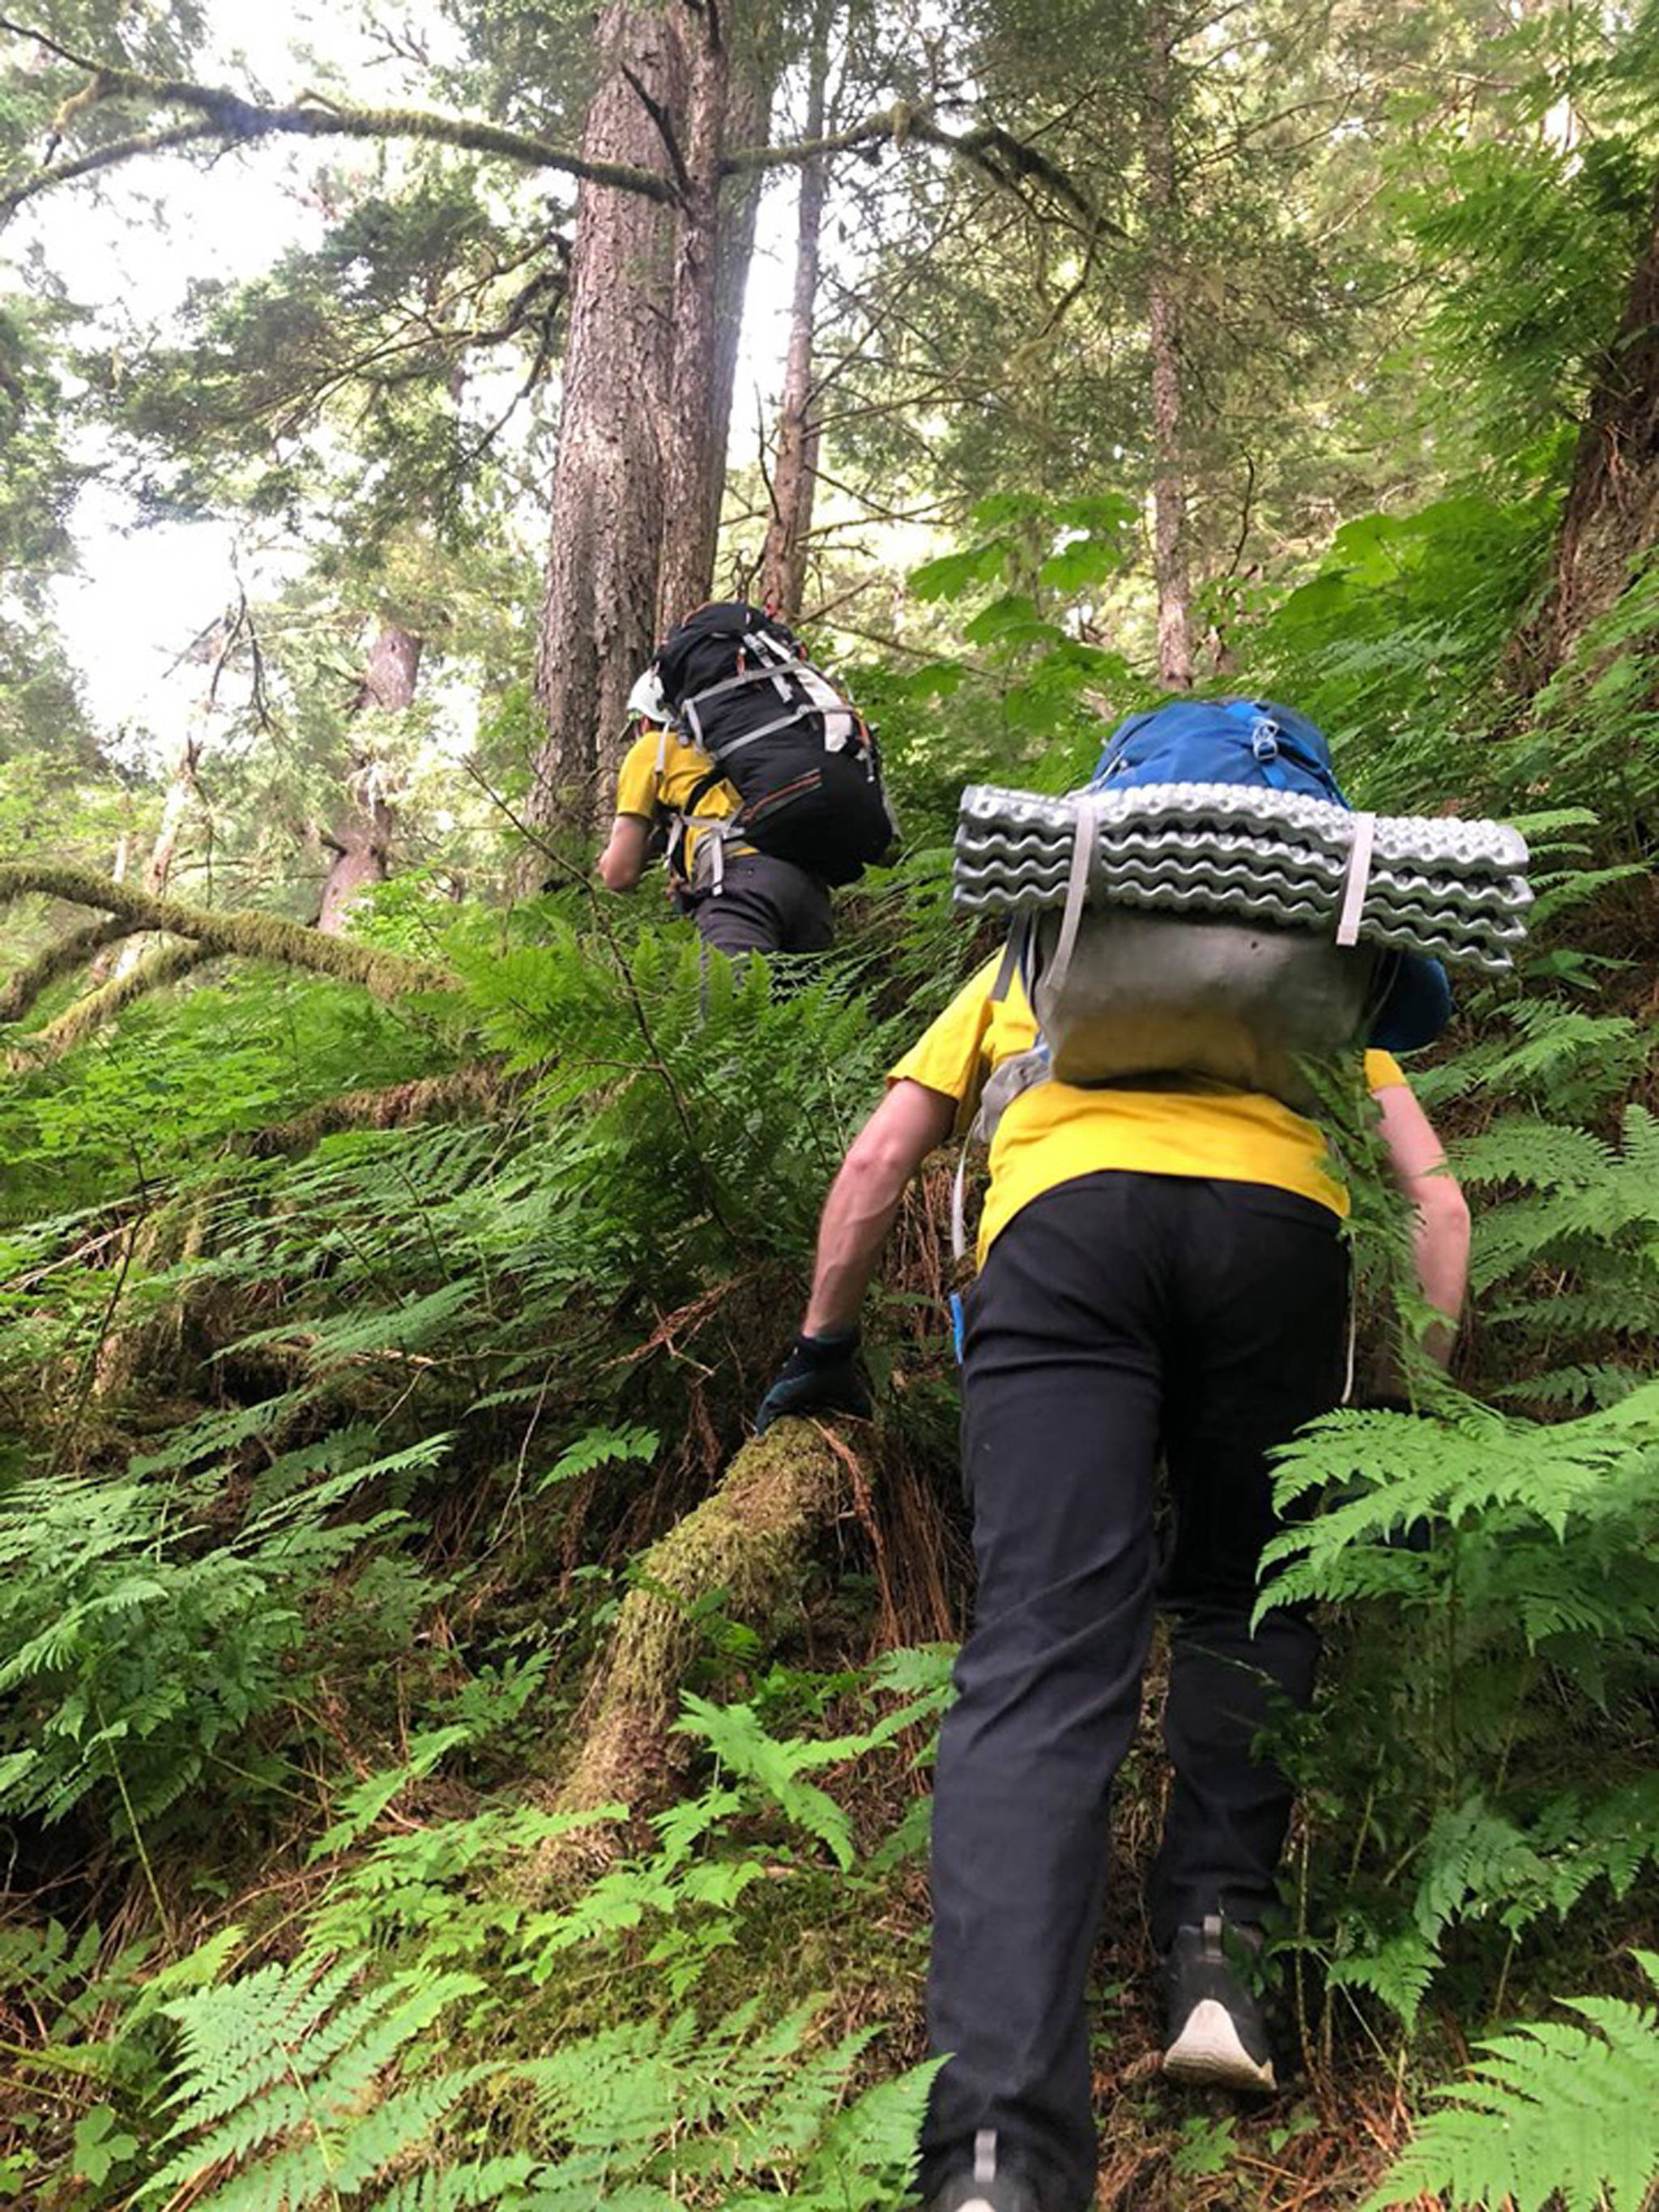 Juneau Mountain Rescue responders help get two hikers off Thunder Mountain on Sunday, June 9, 2019. (Courtesy photo | Juneau Mountain Rescue)